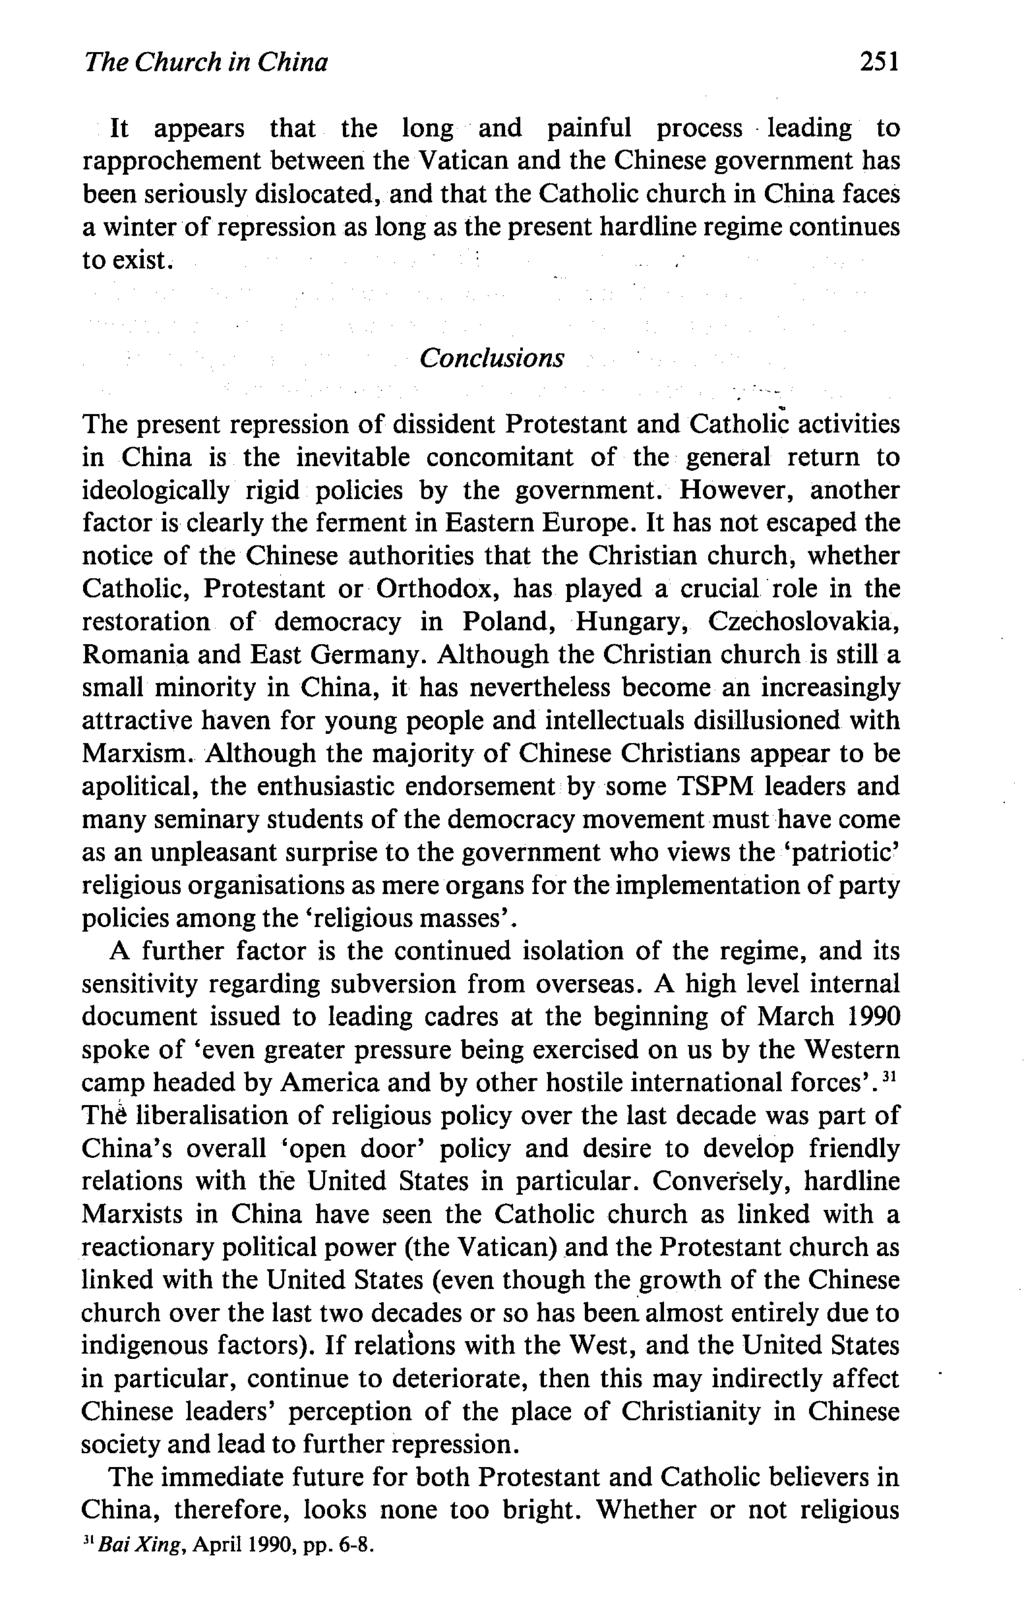 The Church in China 251 It appears that the long and painful process leading to rapprochement between the Vatican and the Chinese government has been seriously dislocated, and that the Catholic